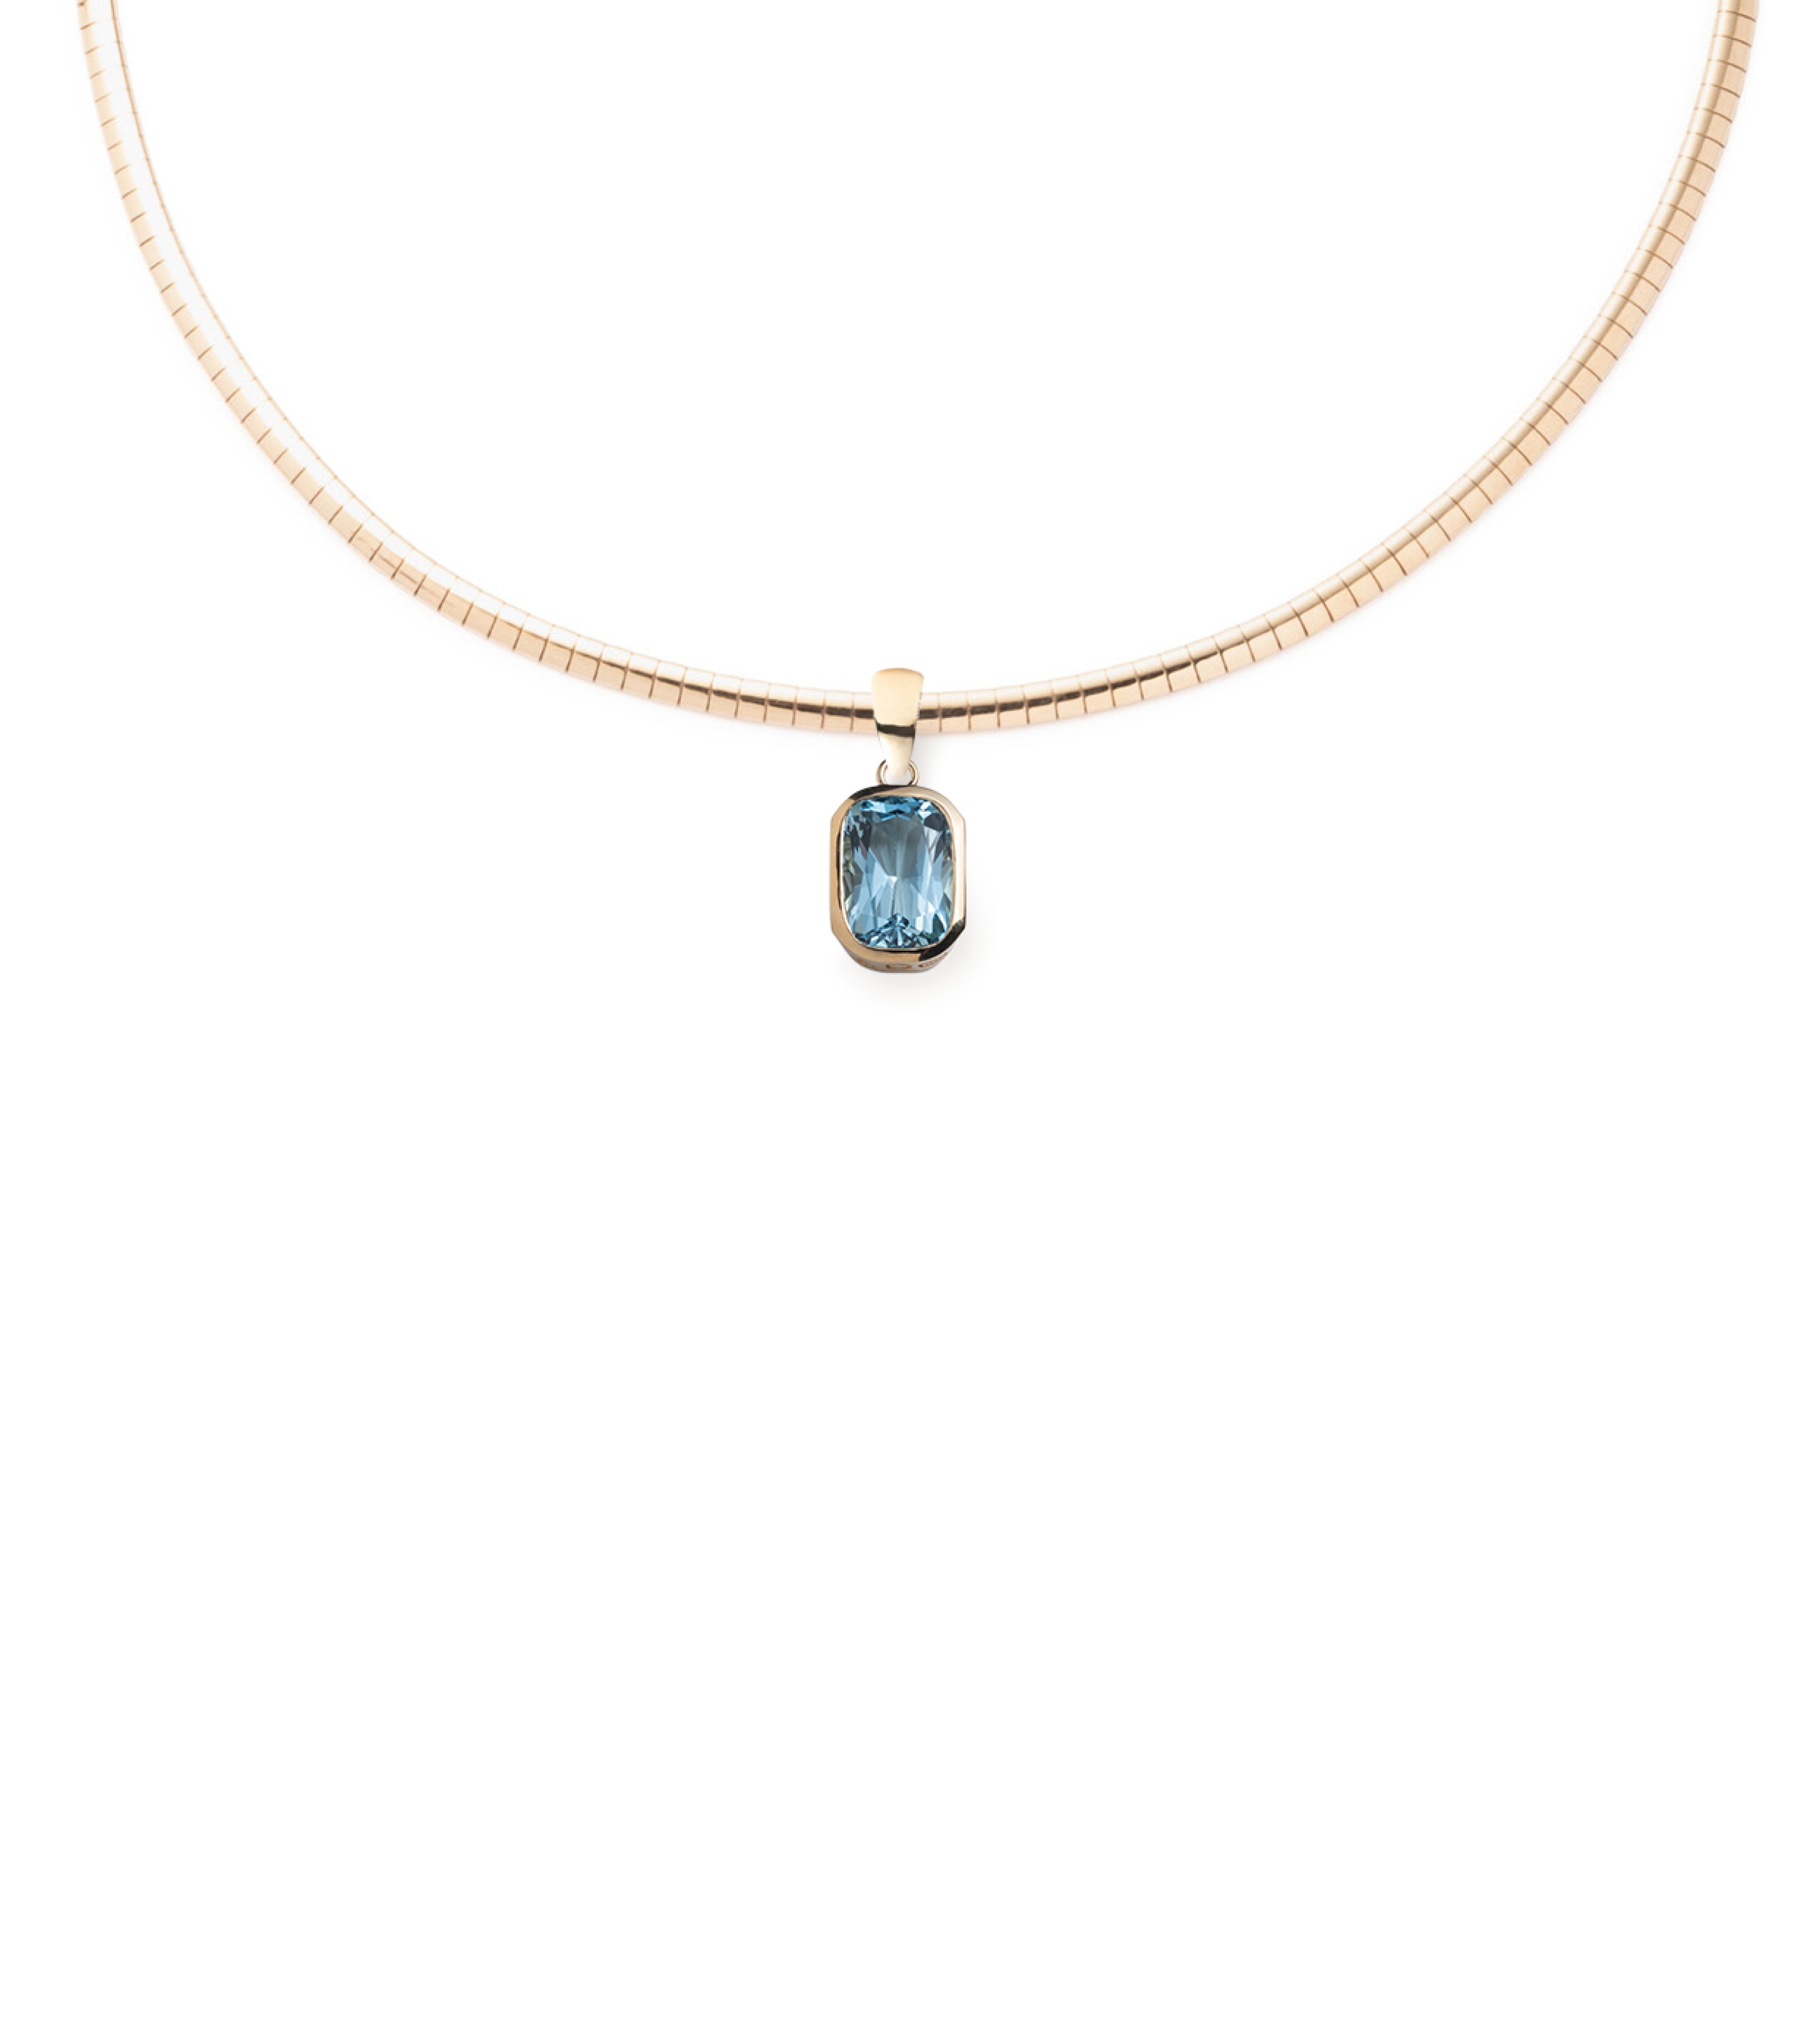 8.89ct Aquamarine - Reverie : One of A Kind Gemstone Small Sleek Collar Necklace